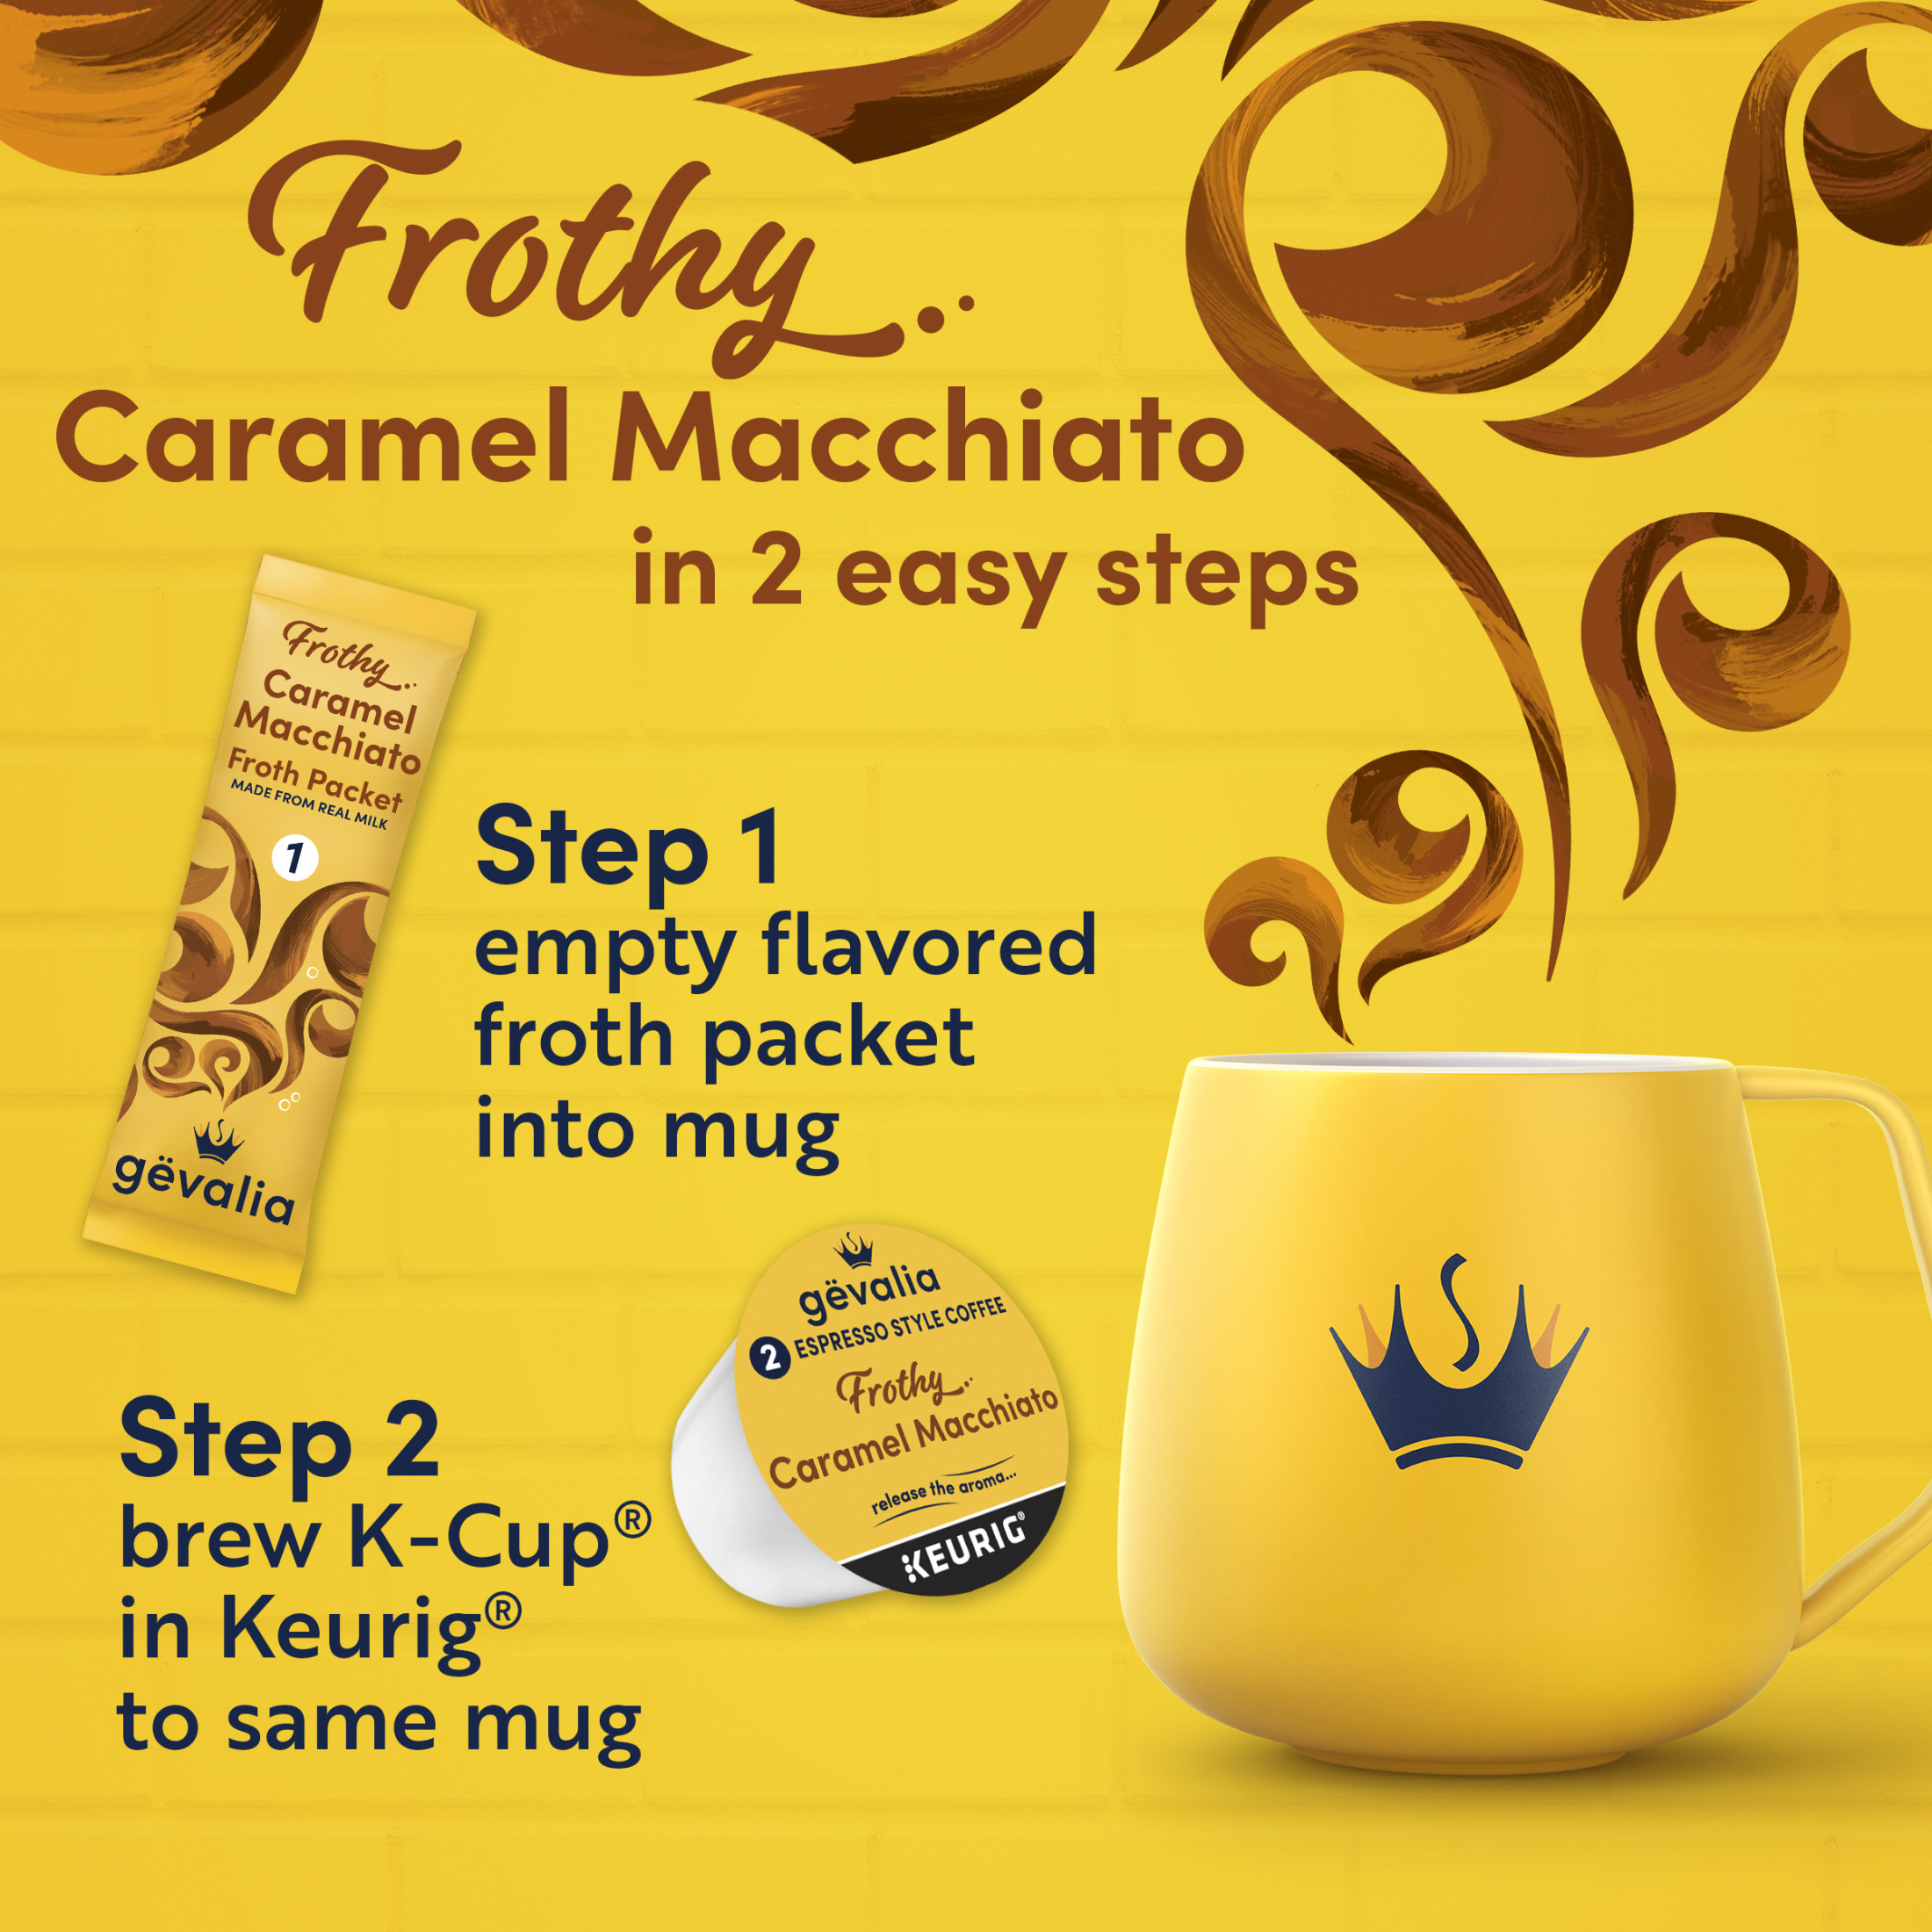 Gevalia Frothy 2-Step Caramel Macchiato Espresso K-Cup® Coffee Pods & Froth Packets Kit, 6 ct Box - image 5 of 14